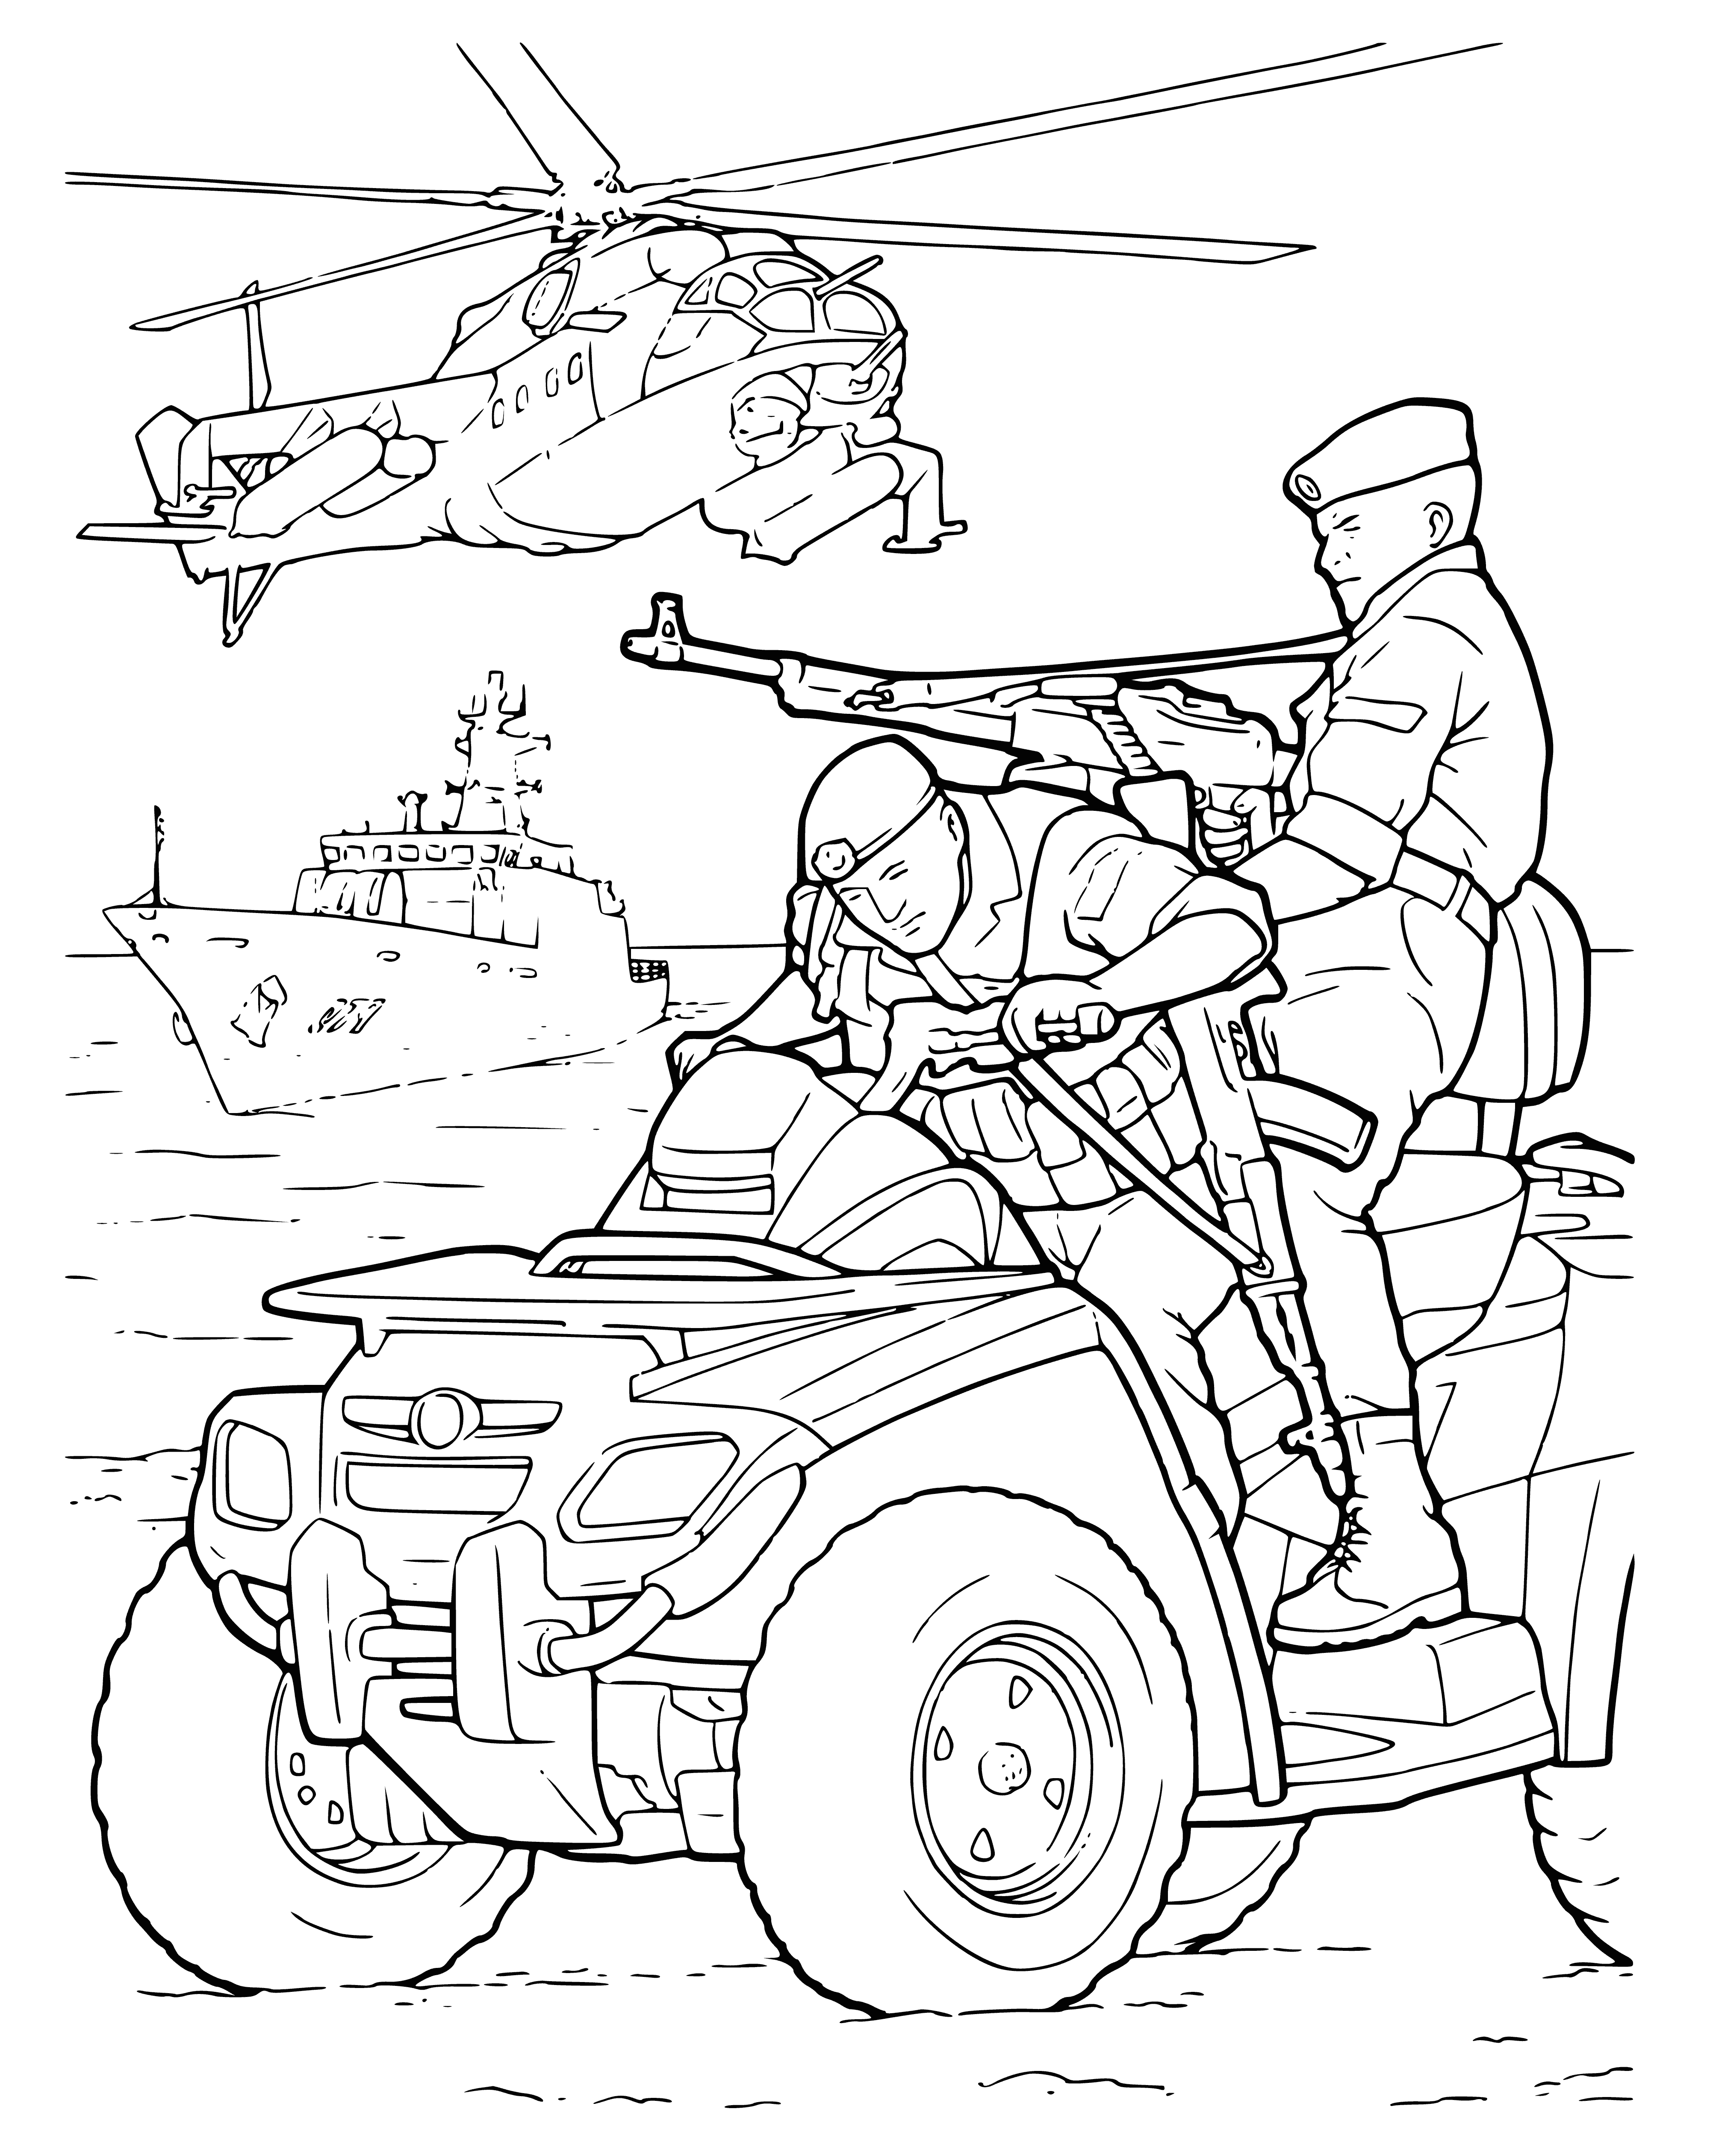 coloring page: Army = trained fighters w/equipment & discipline. War-ready! #army #military #discipline #coloringpage